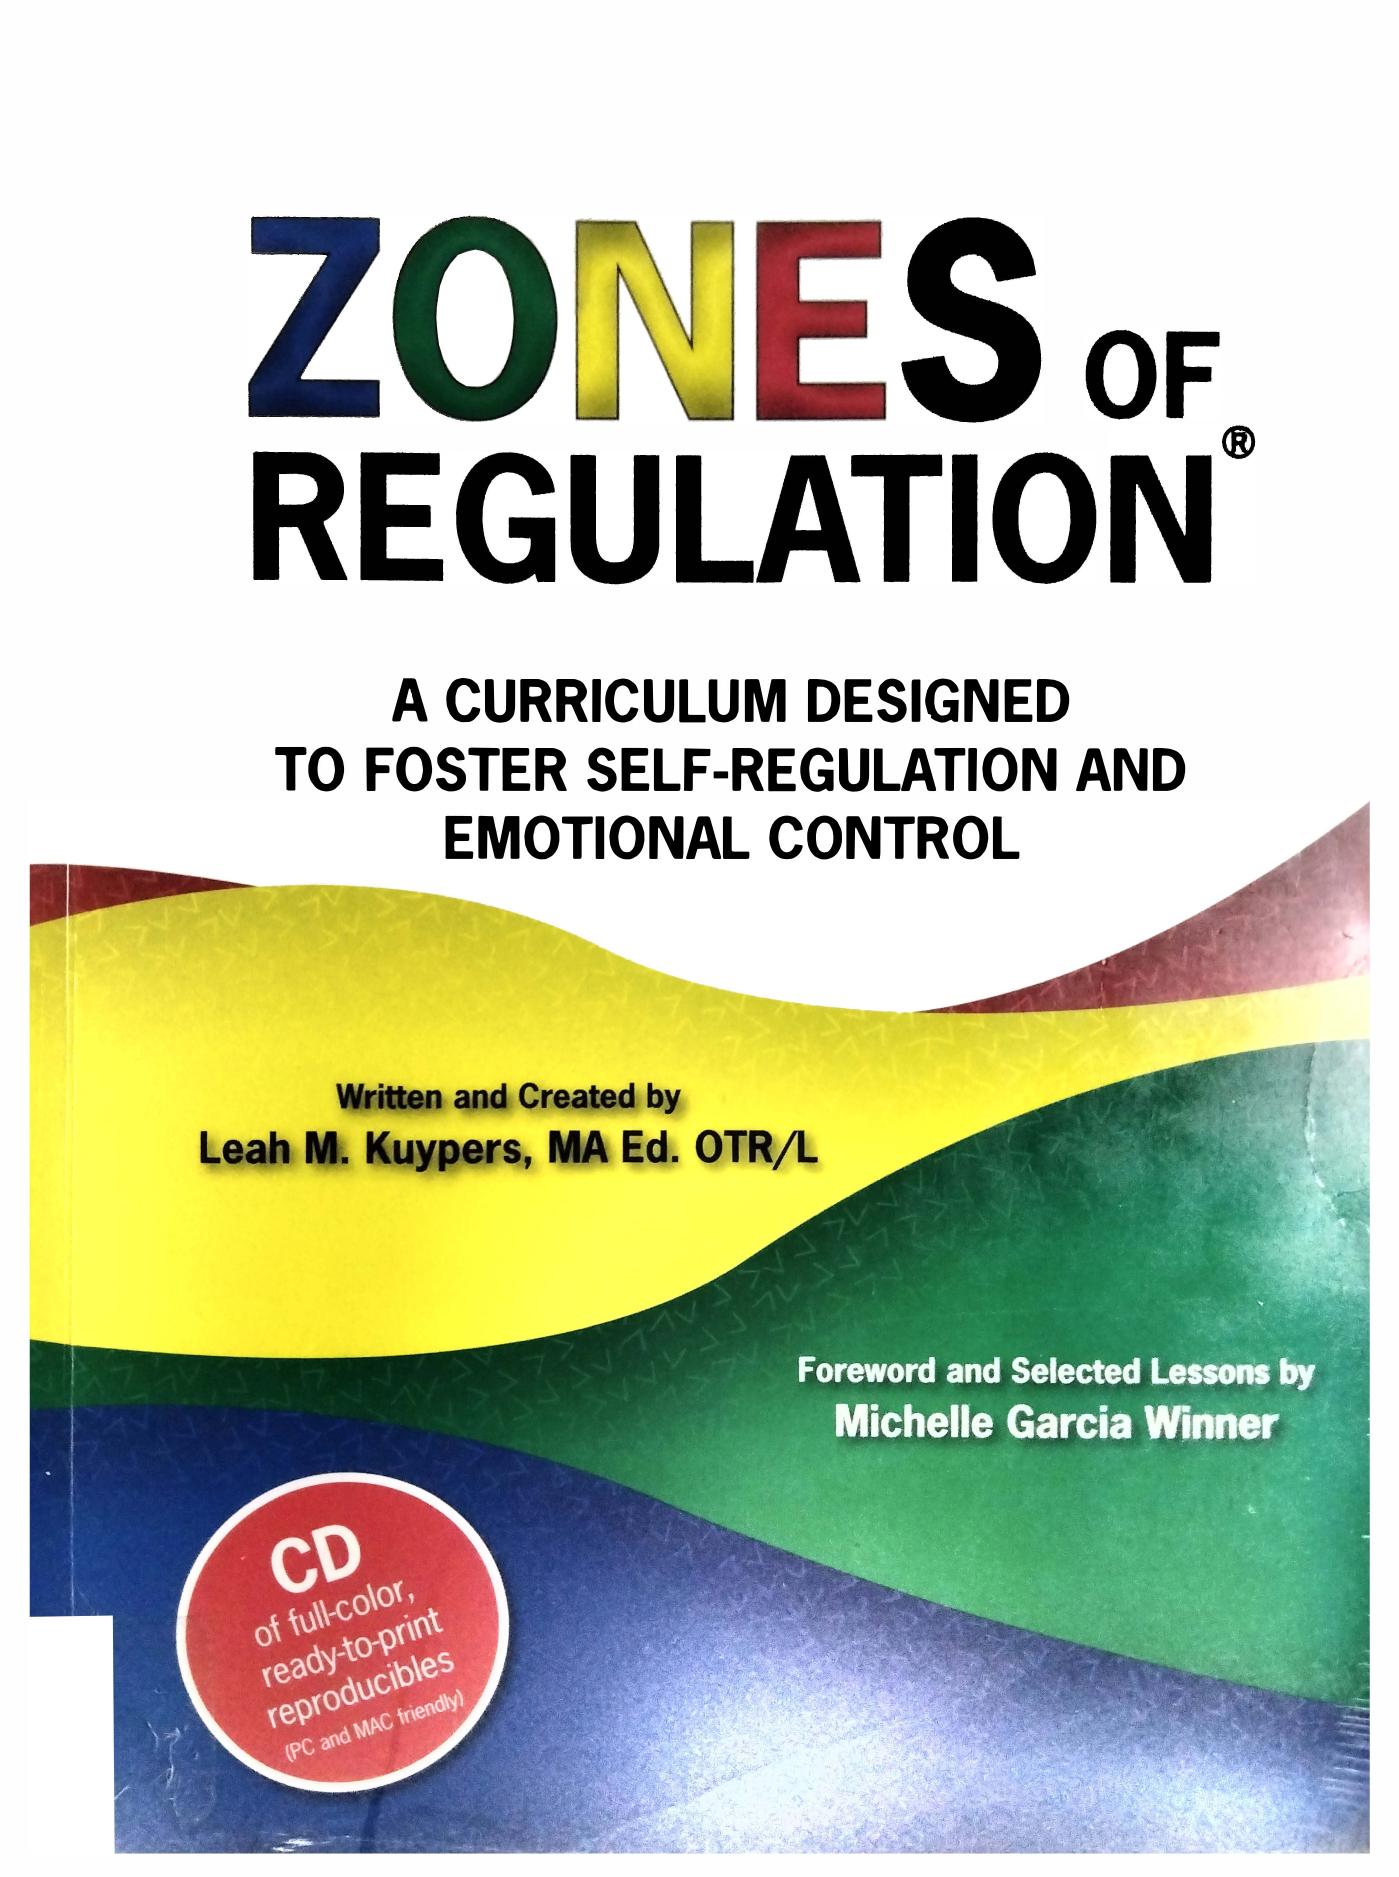 The zones of regulation : a curriculum designed to foster self-regulation and emotional control by Leah Kuypers